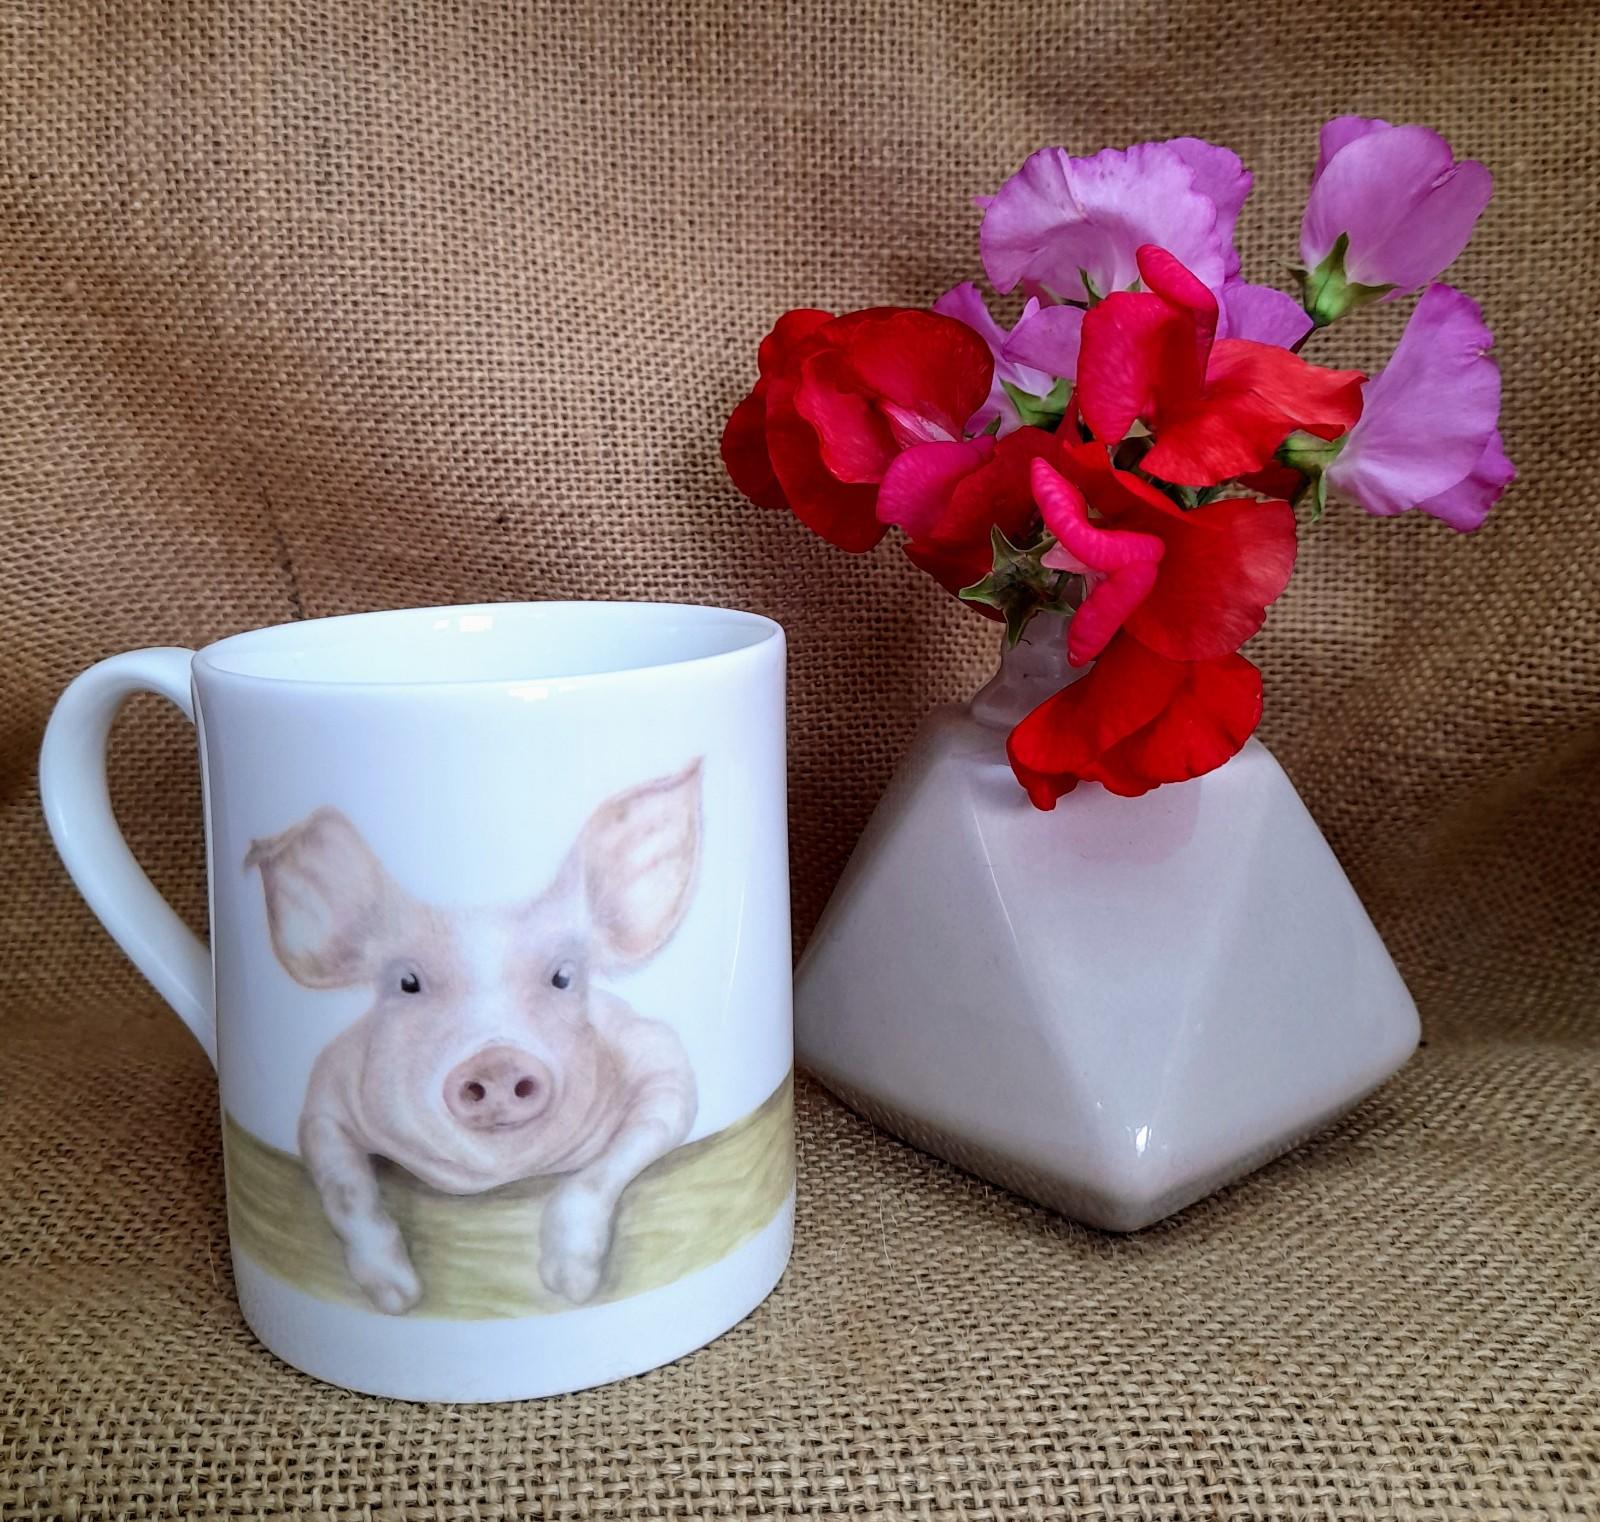 Mr Pig China Cup with Flowers & Vase